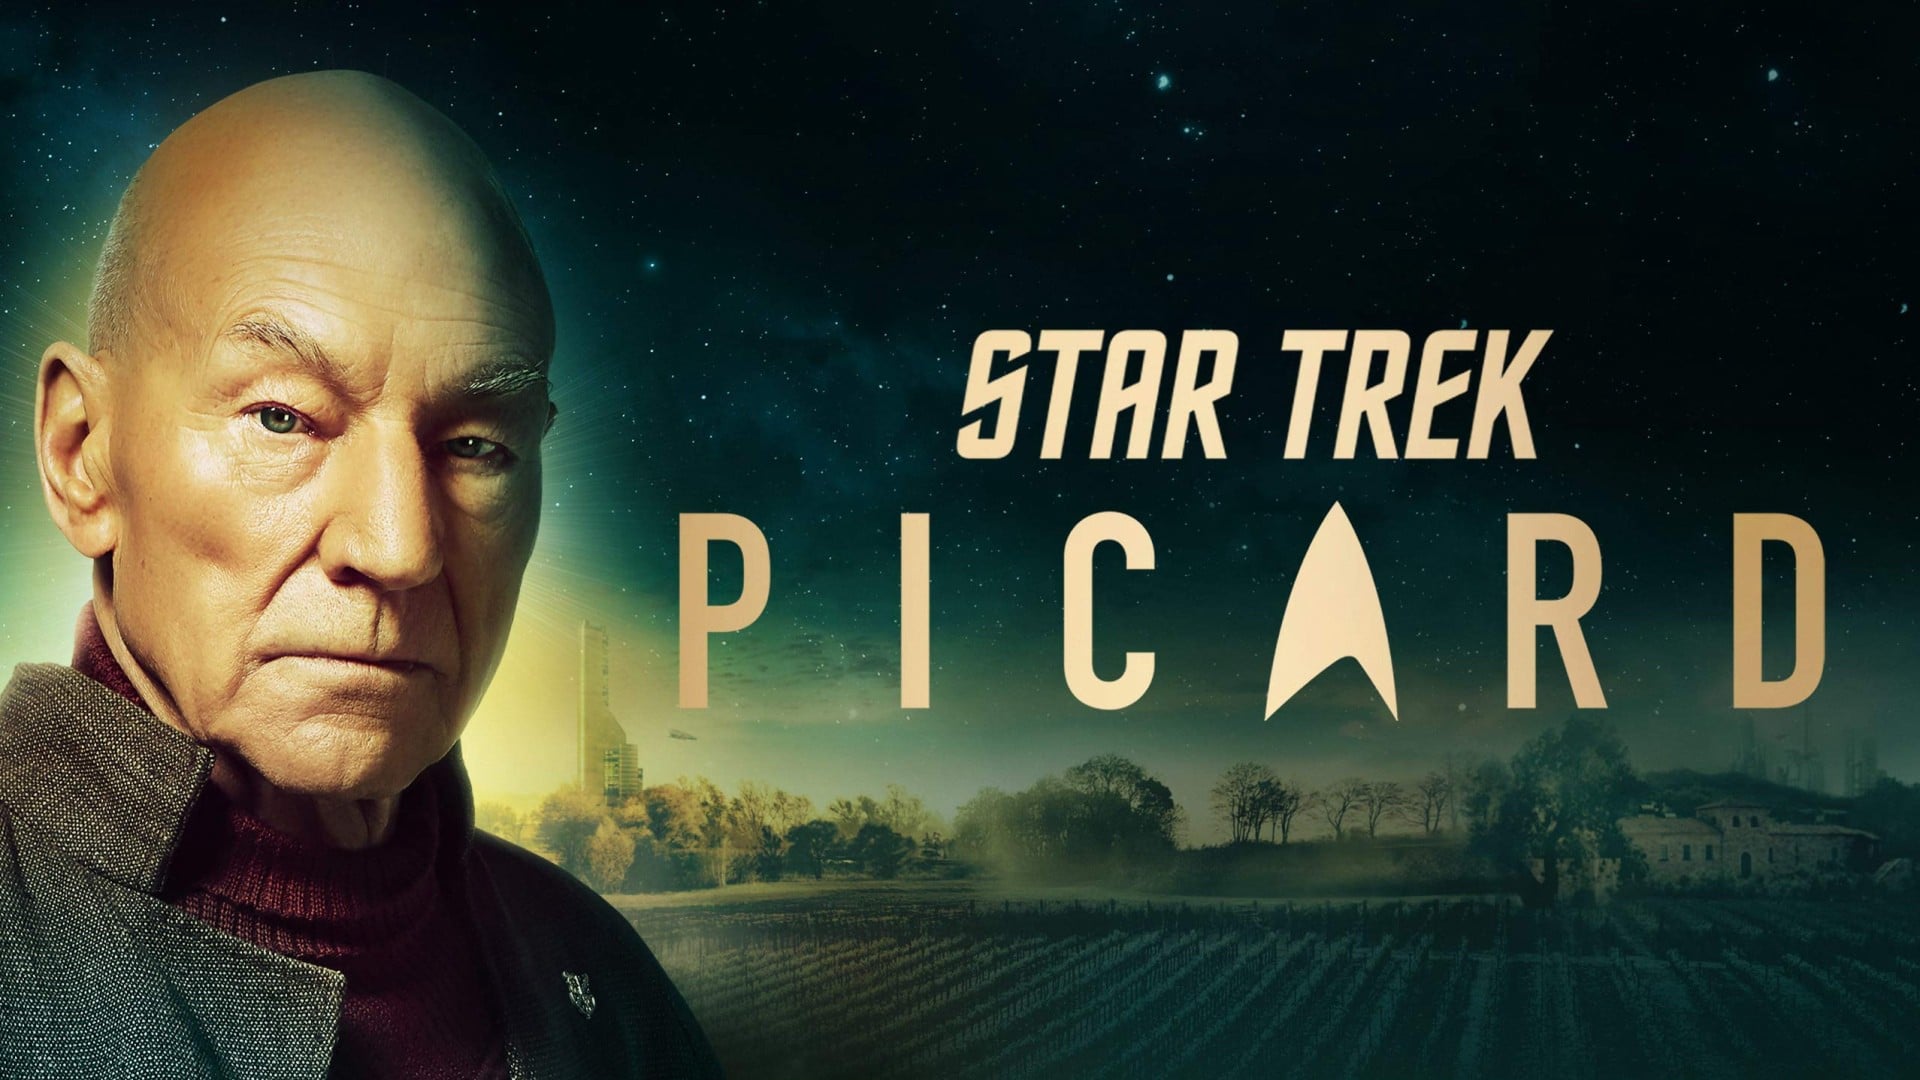 Star Trek: Picard Michael Chabon's Shares His Typical Version of the Show